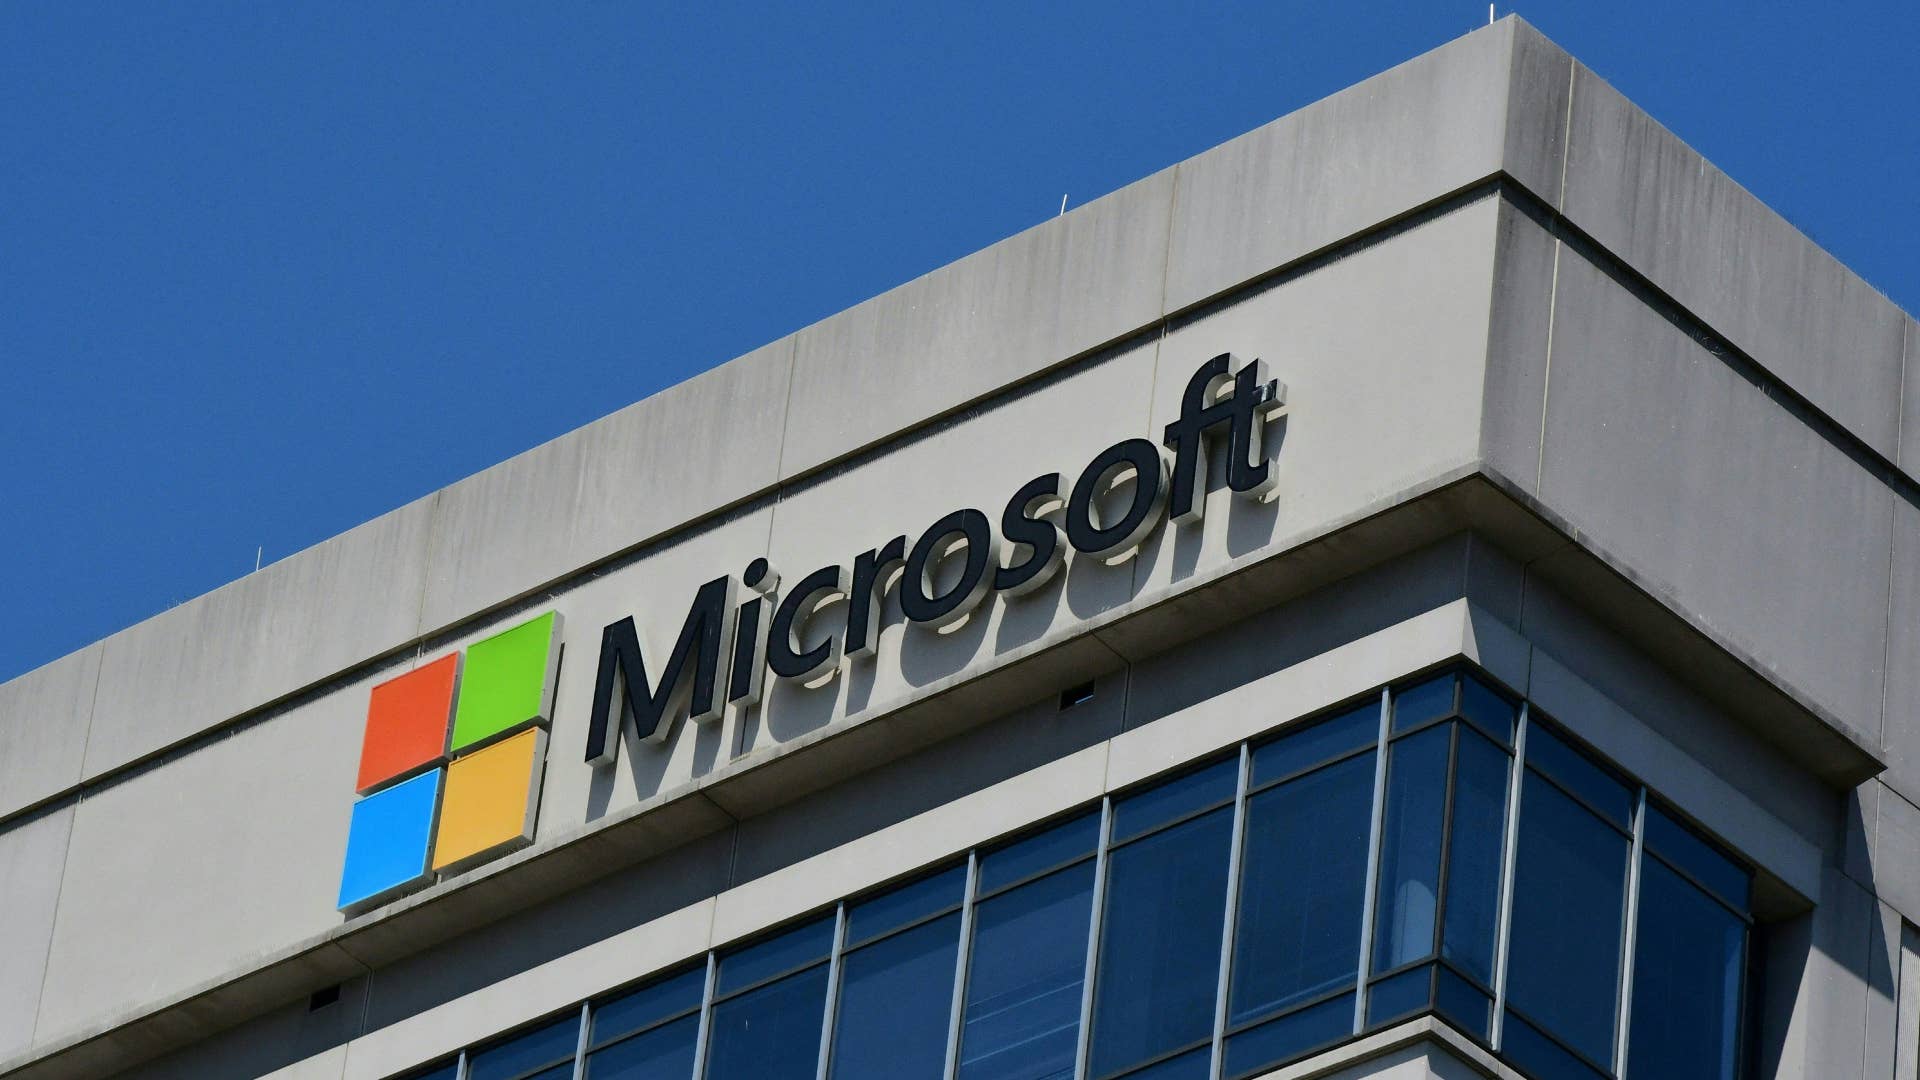 A logo for the Microsoft company building is pictured